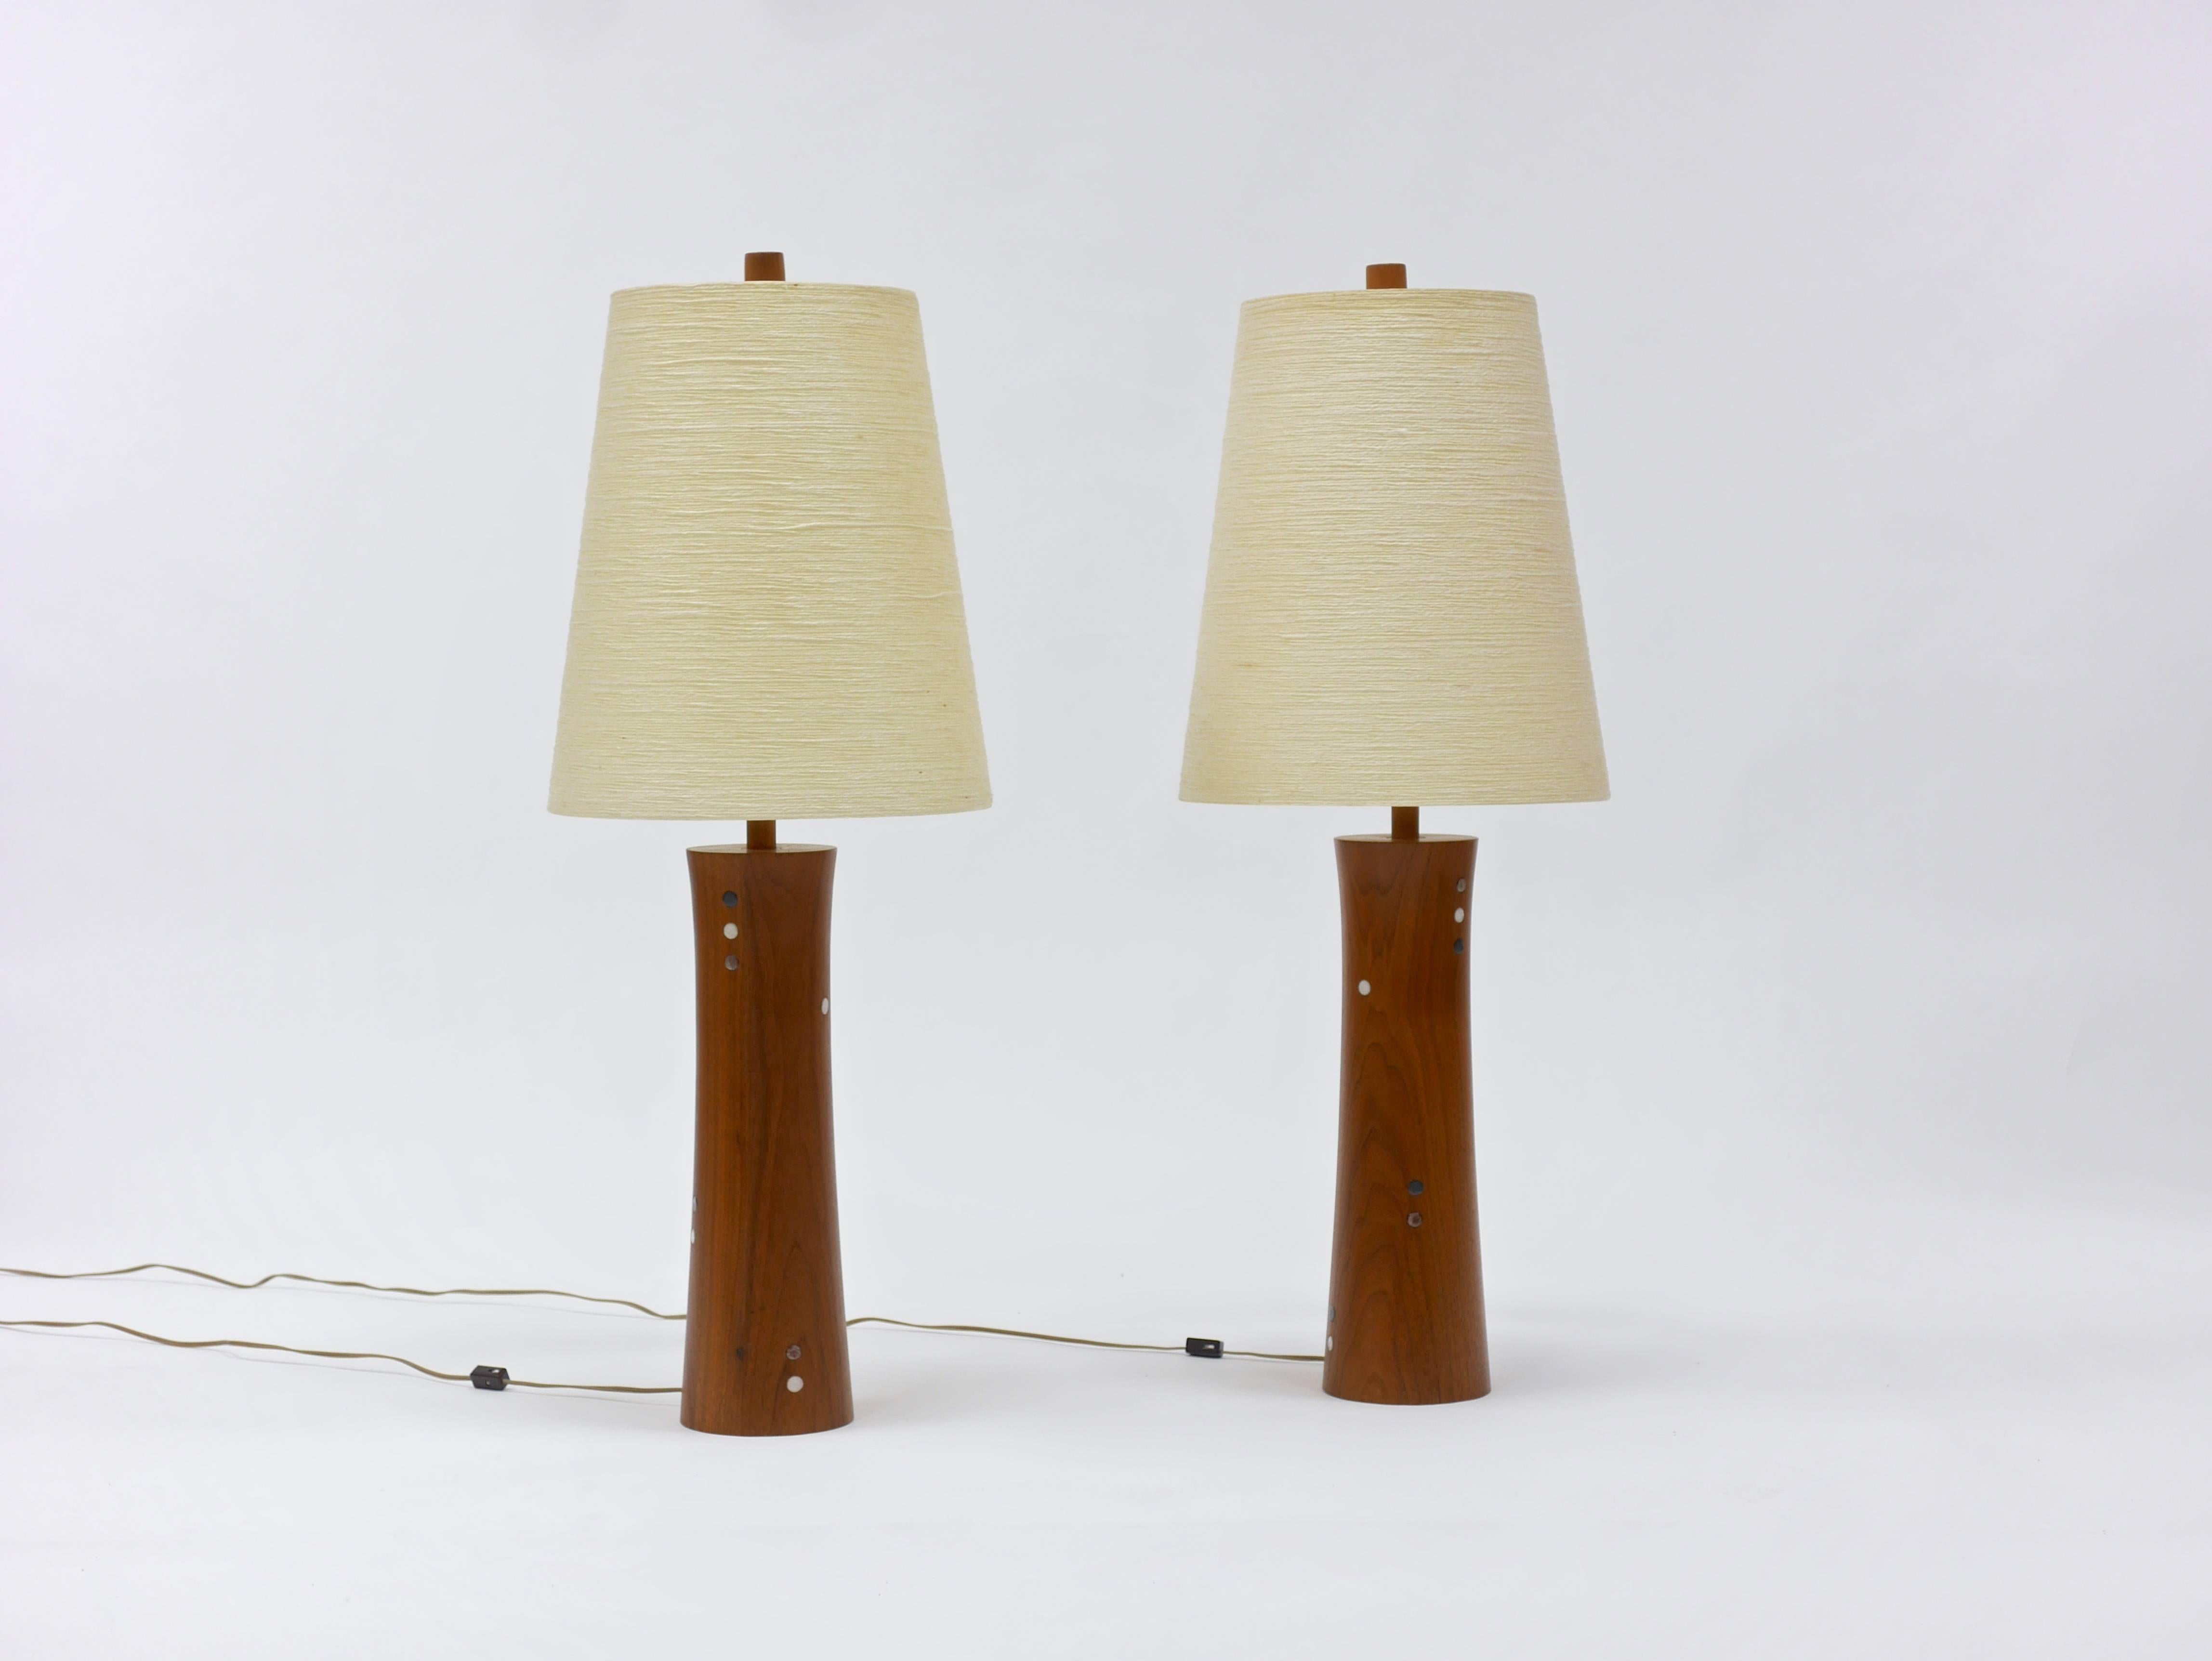 Laminated walnut, turned, hourglass forms with inlaid glazed tiles. Each with a fiberglass and jute shade by Lotte and Gunnar Bostlund. Original walnut finials. 37